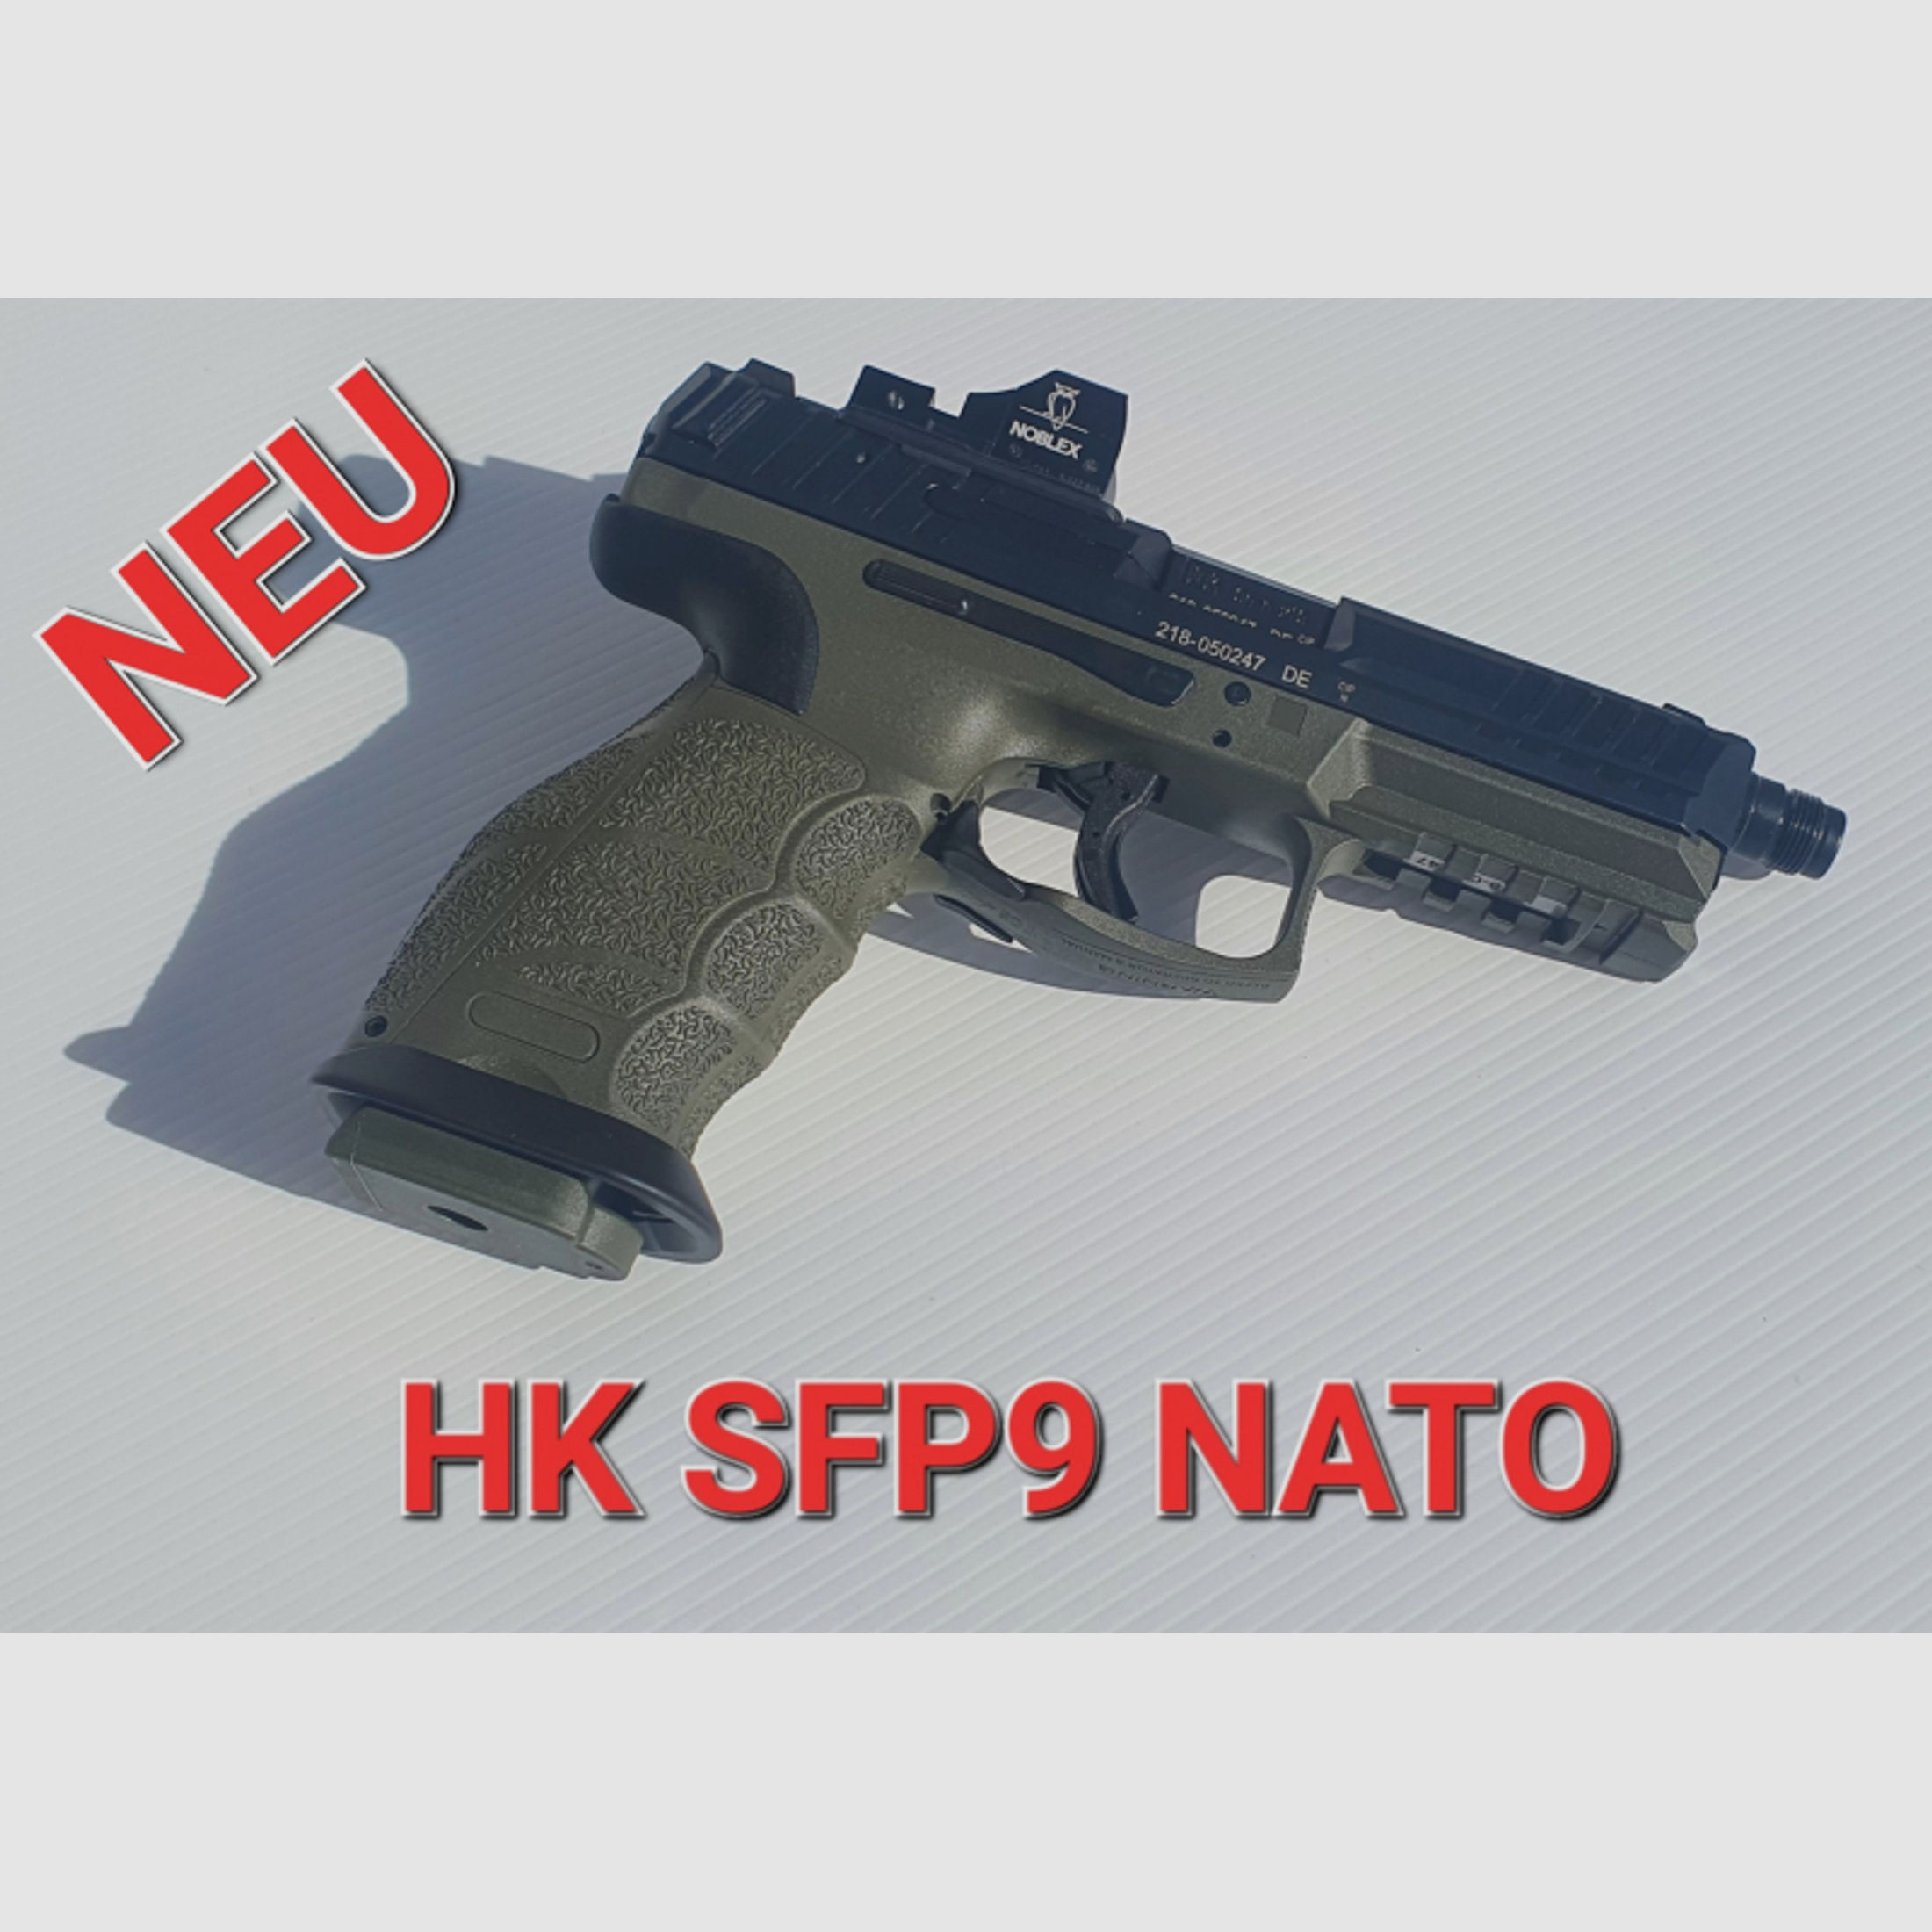 HK SFP9 NATO - HALBAUTOMATISCHE PISTOLE - OPTICAL READY - TACTICAL - 9 MM LUGER -